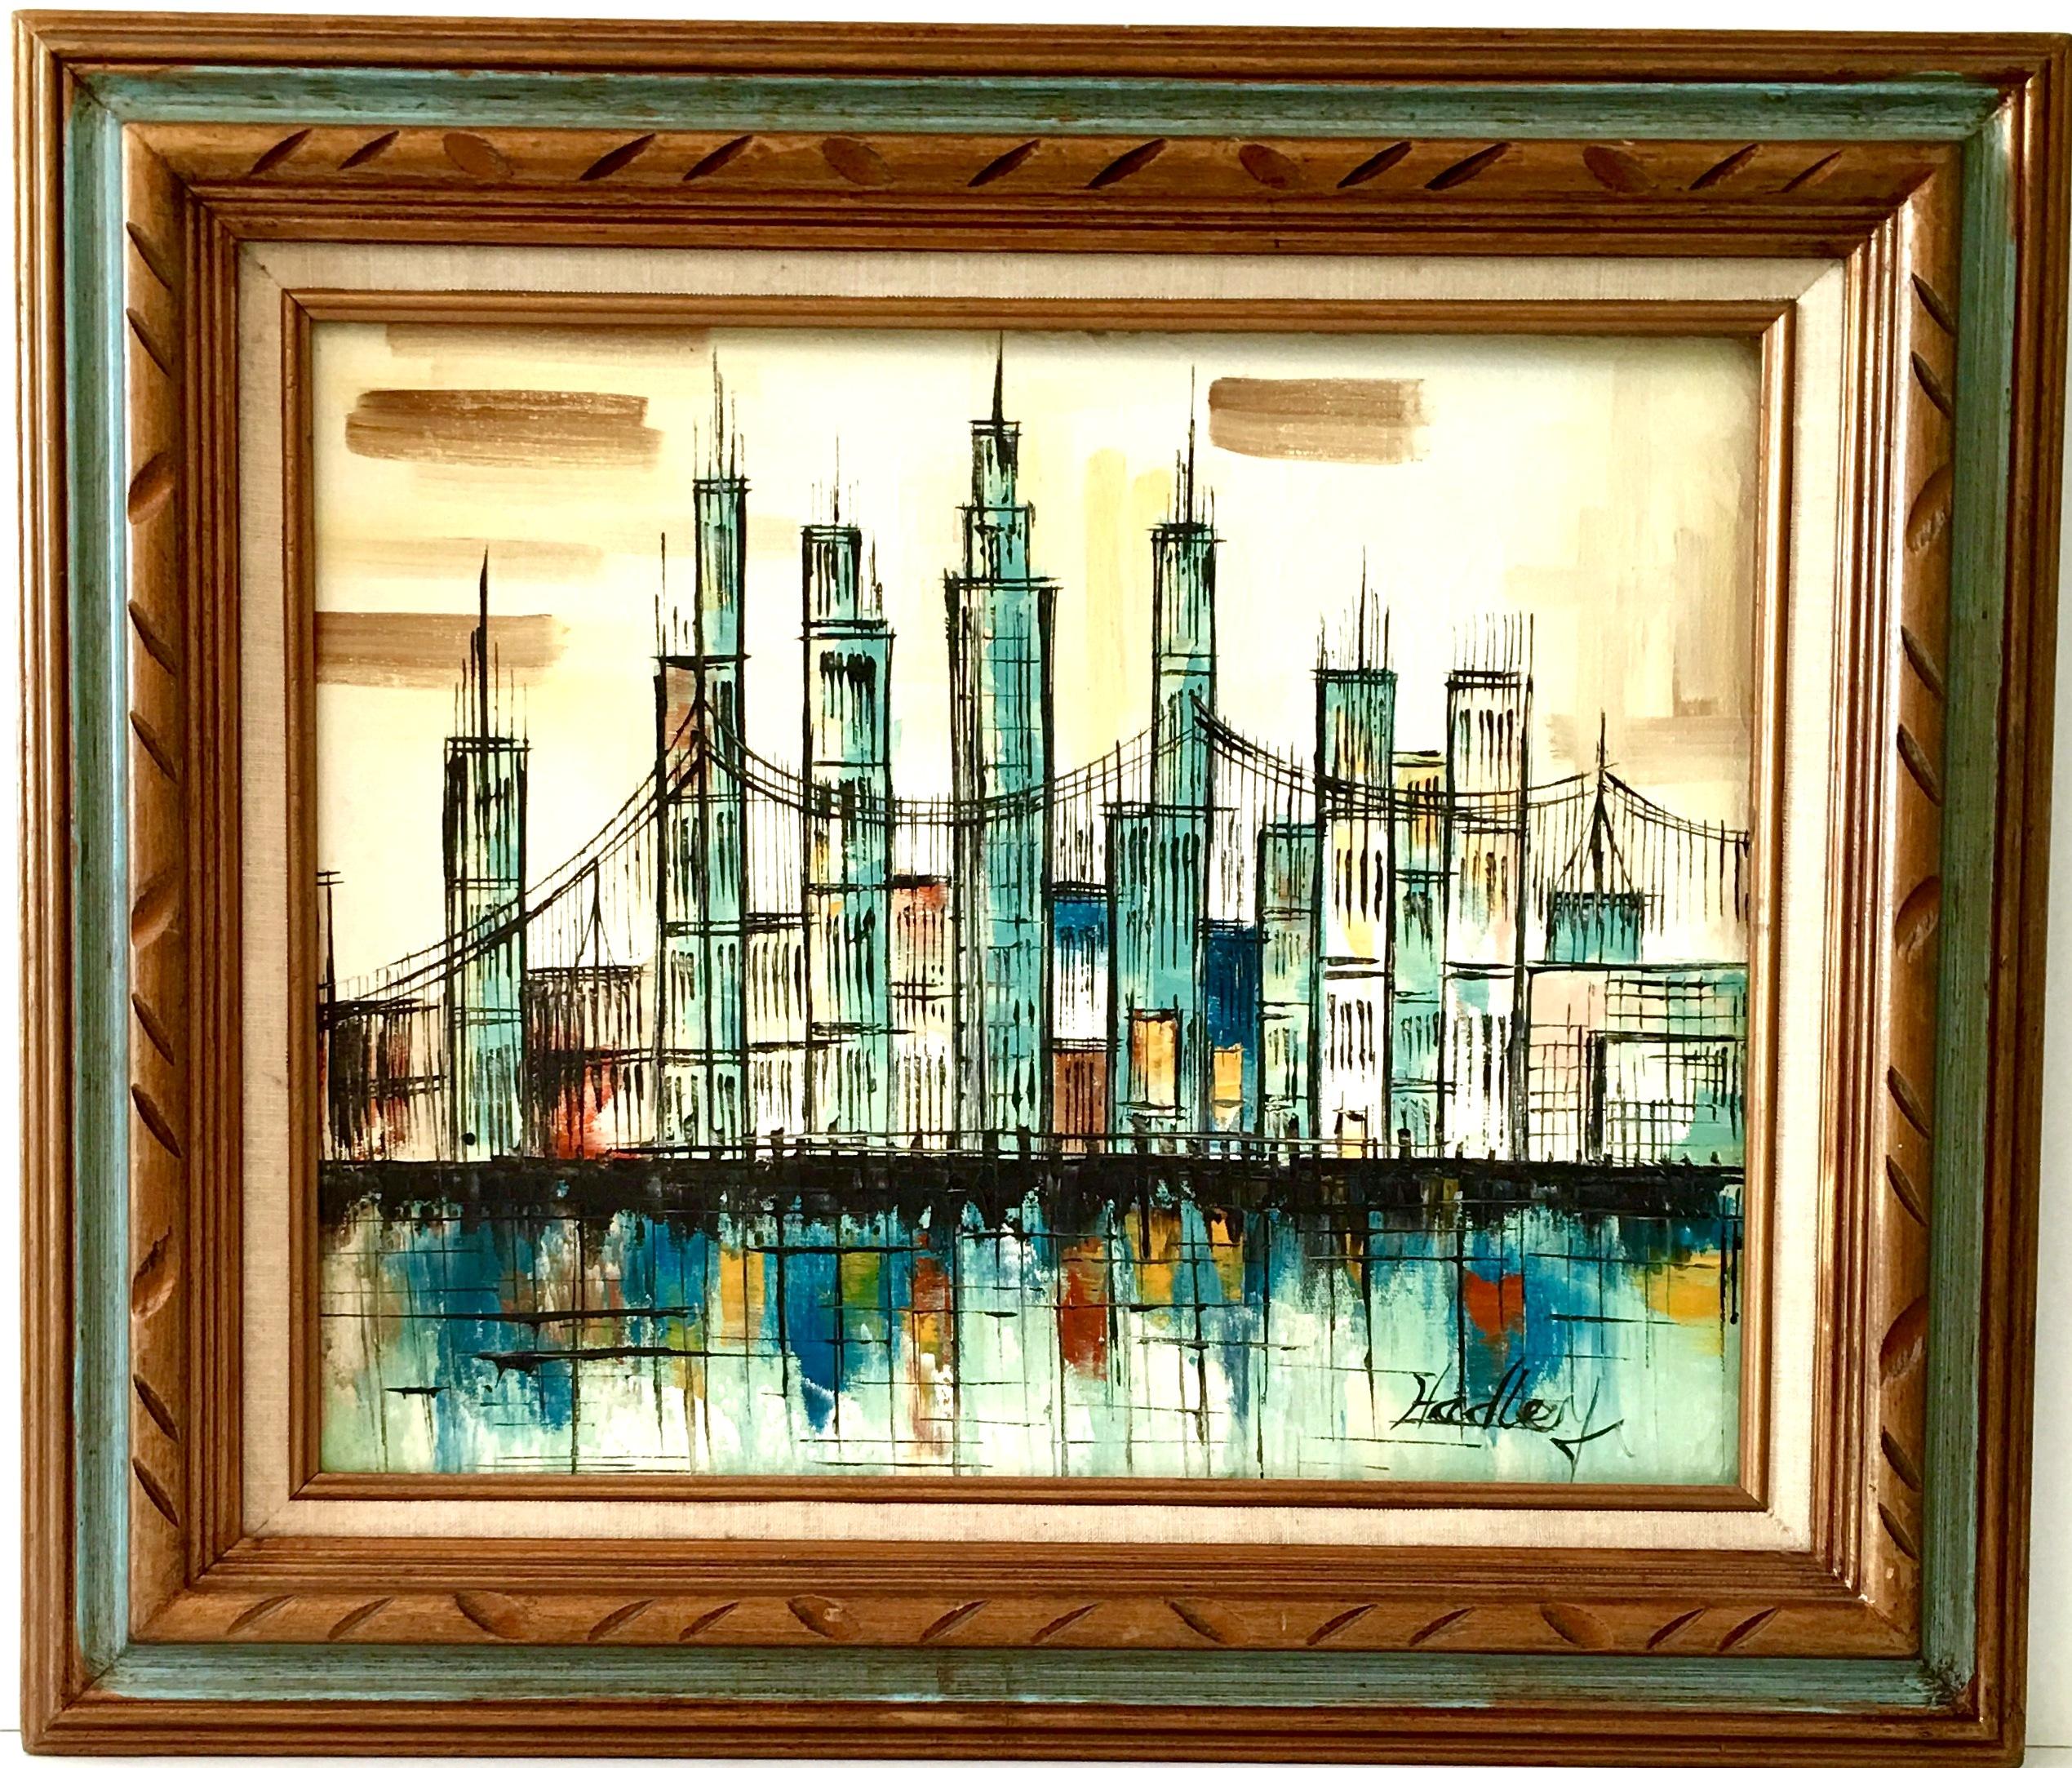 Mid-Century Modern original oil on canvas painting of New York City. Professionally framed with carved wood with blue painted trim and linen matte detail frame. Signed lower right, Hadley. Ready to hang with existing hardware.
Image size: 20